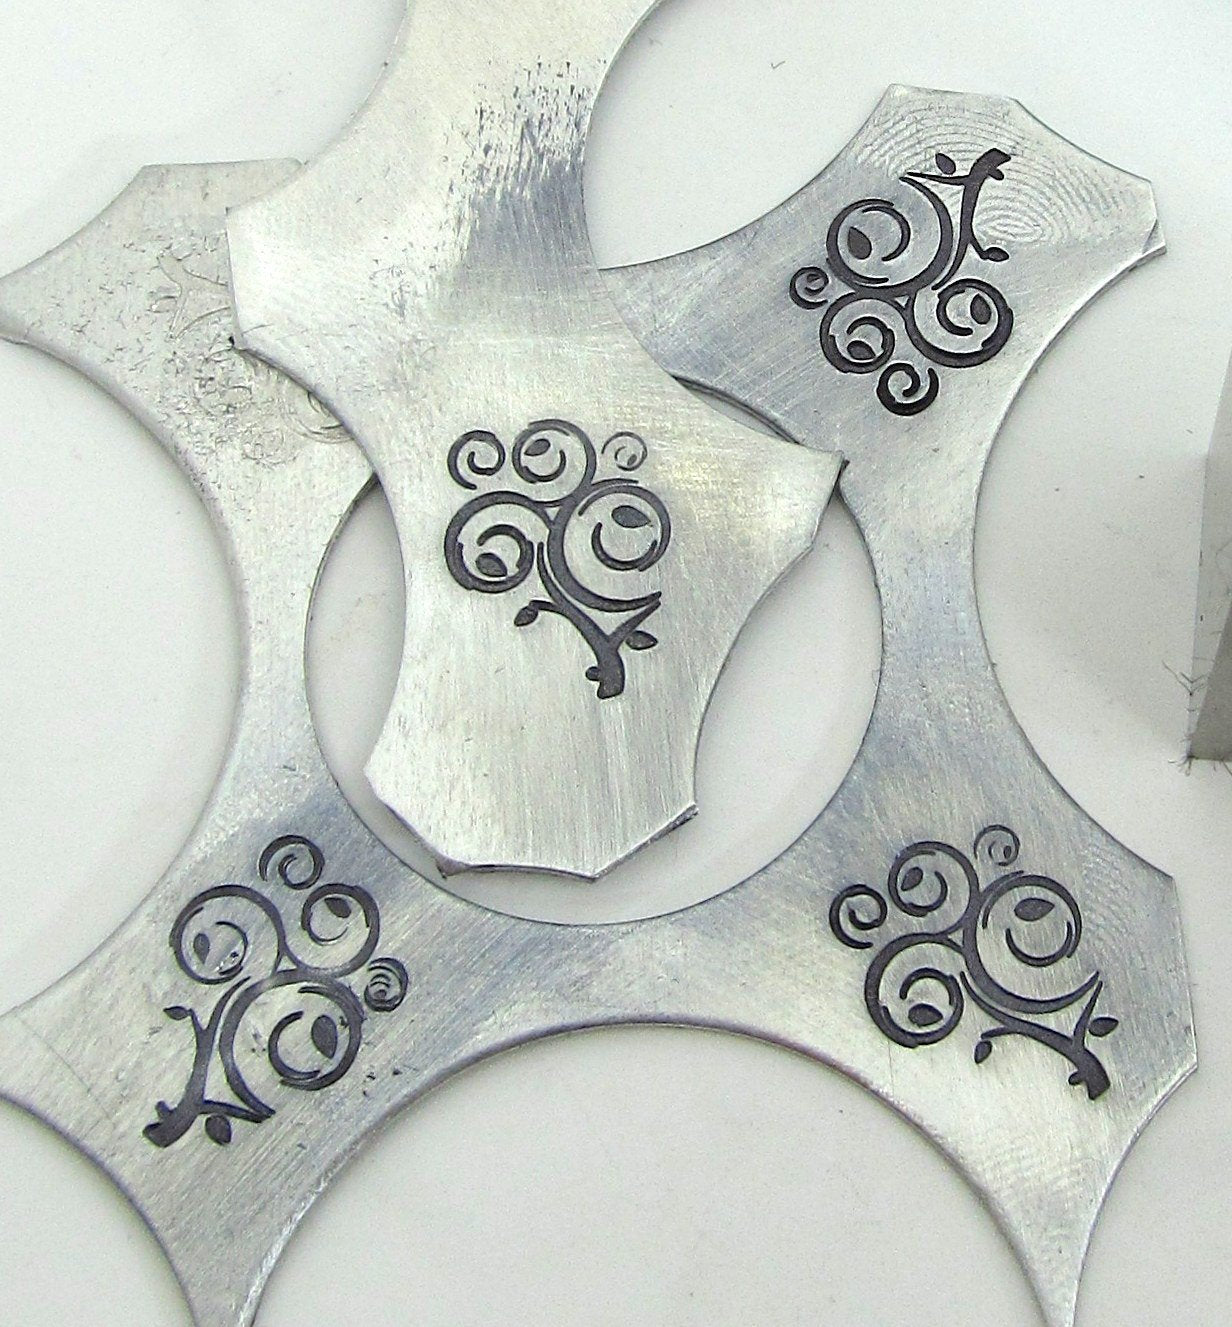 Metal Stamp for Metal Hand Stamping - Silver and gold tag stamping